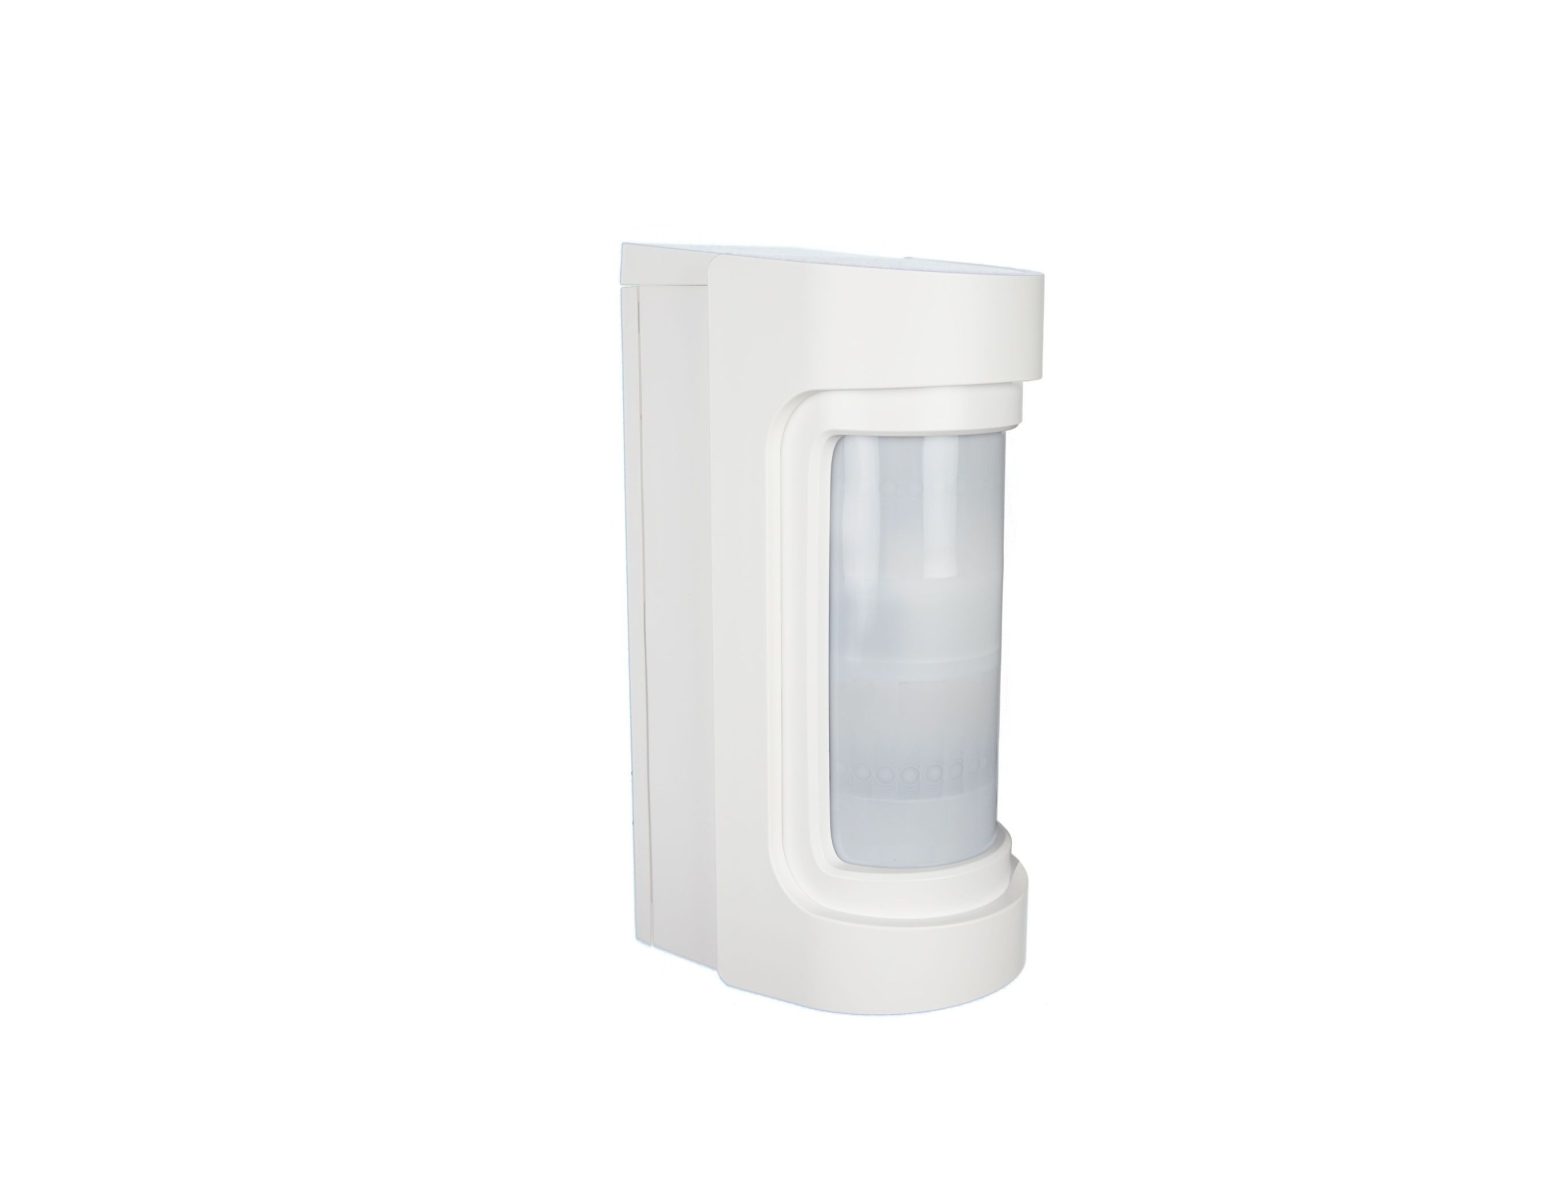 resideo 5800PIR-OD2 Wireless Outdoor Motion Detector Installation Guide